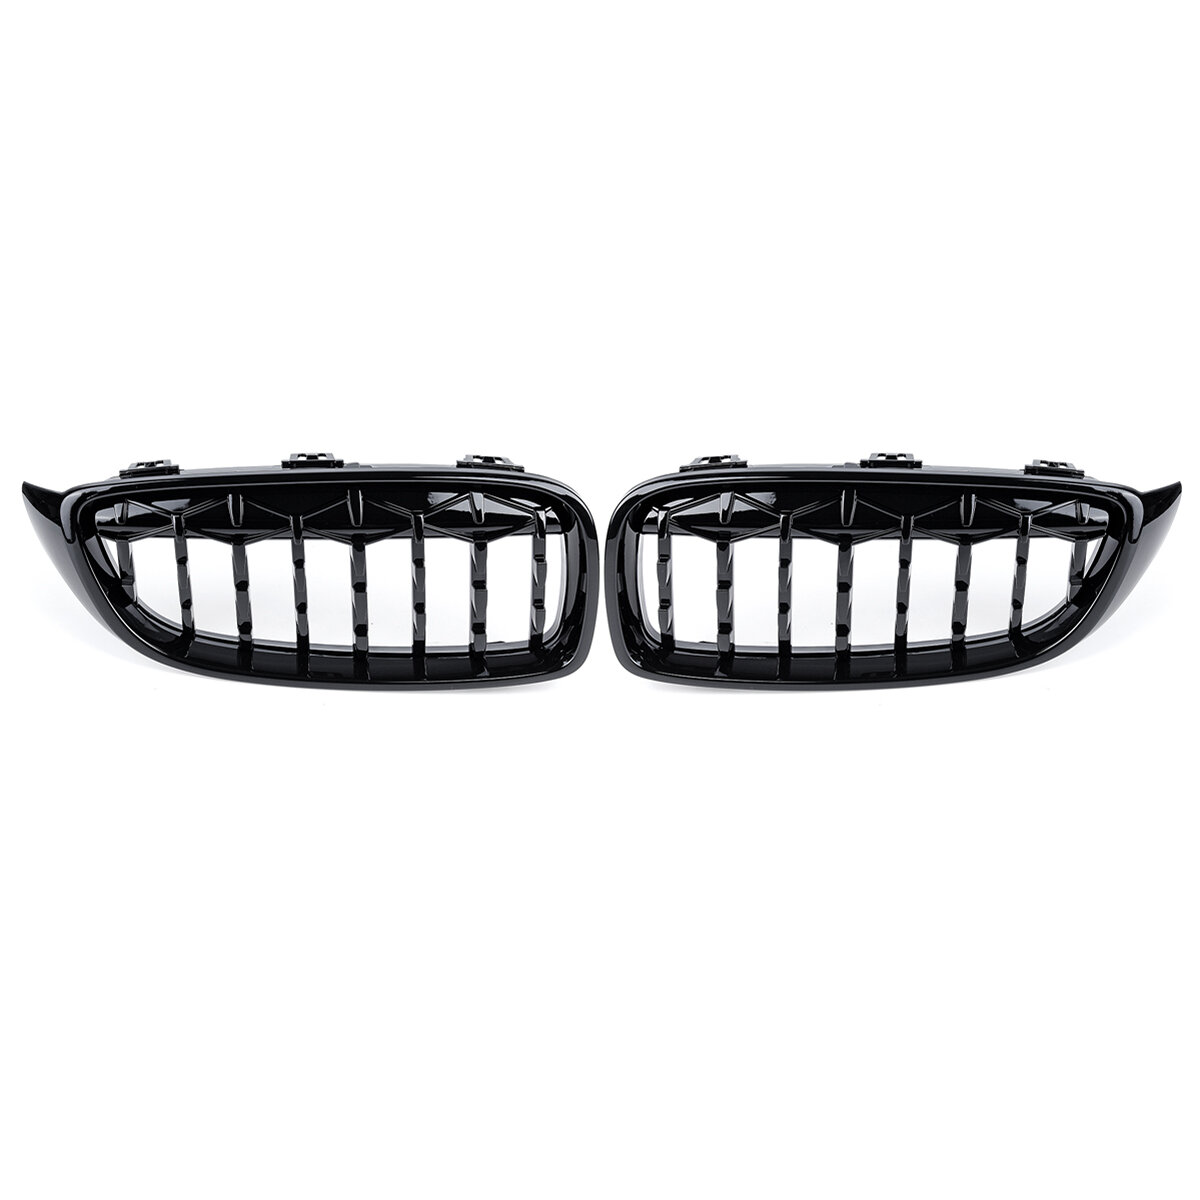 

Front Kidney Grill Grille Diamond Mesh Black For BMW M4 F32 F33 F82 F83